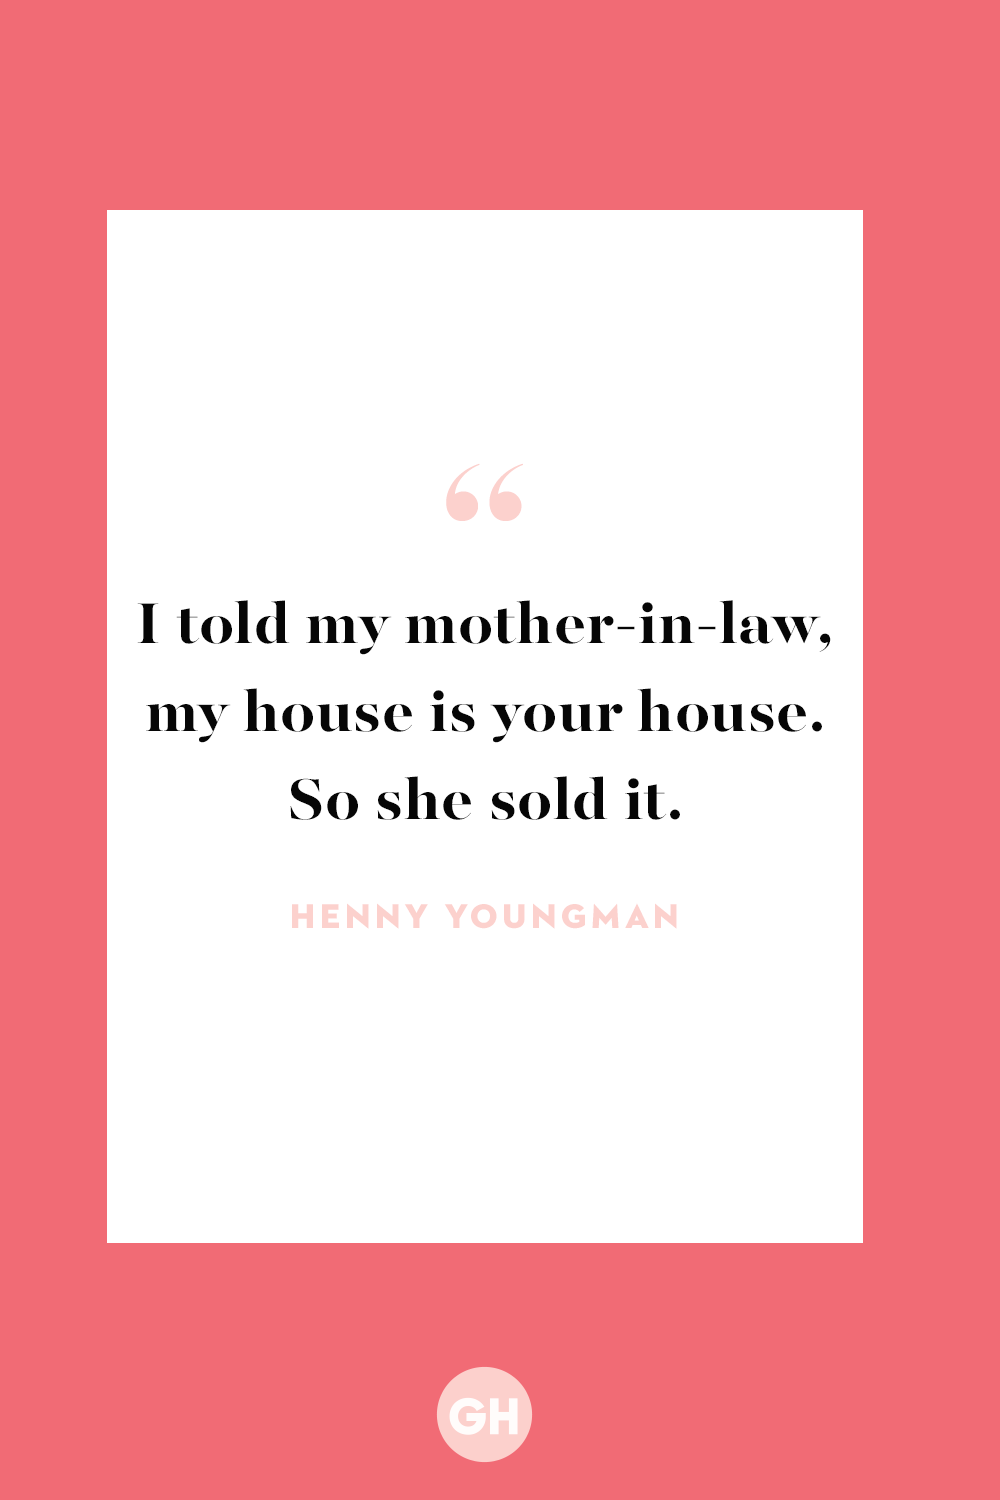 30 Best Mother-in-Law Quotes and Sayings picture image